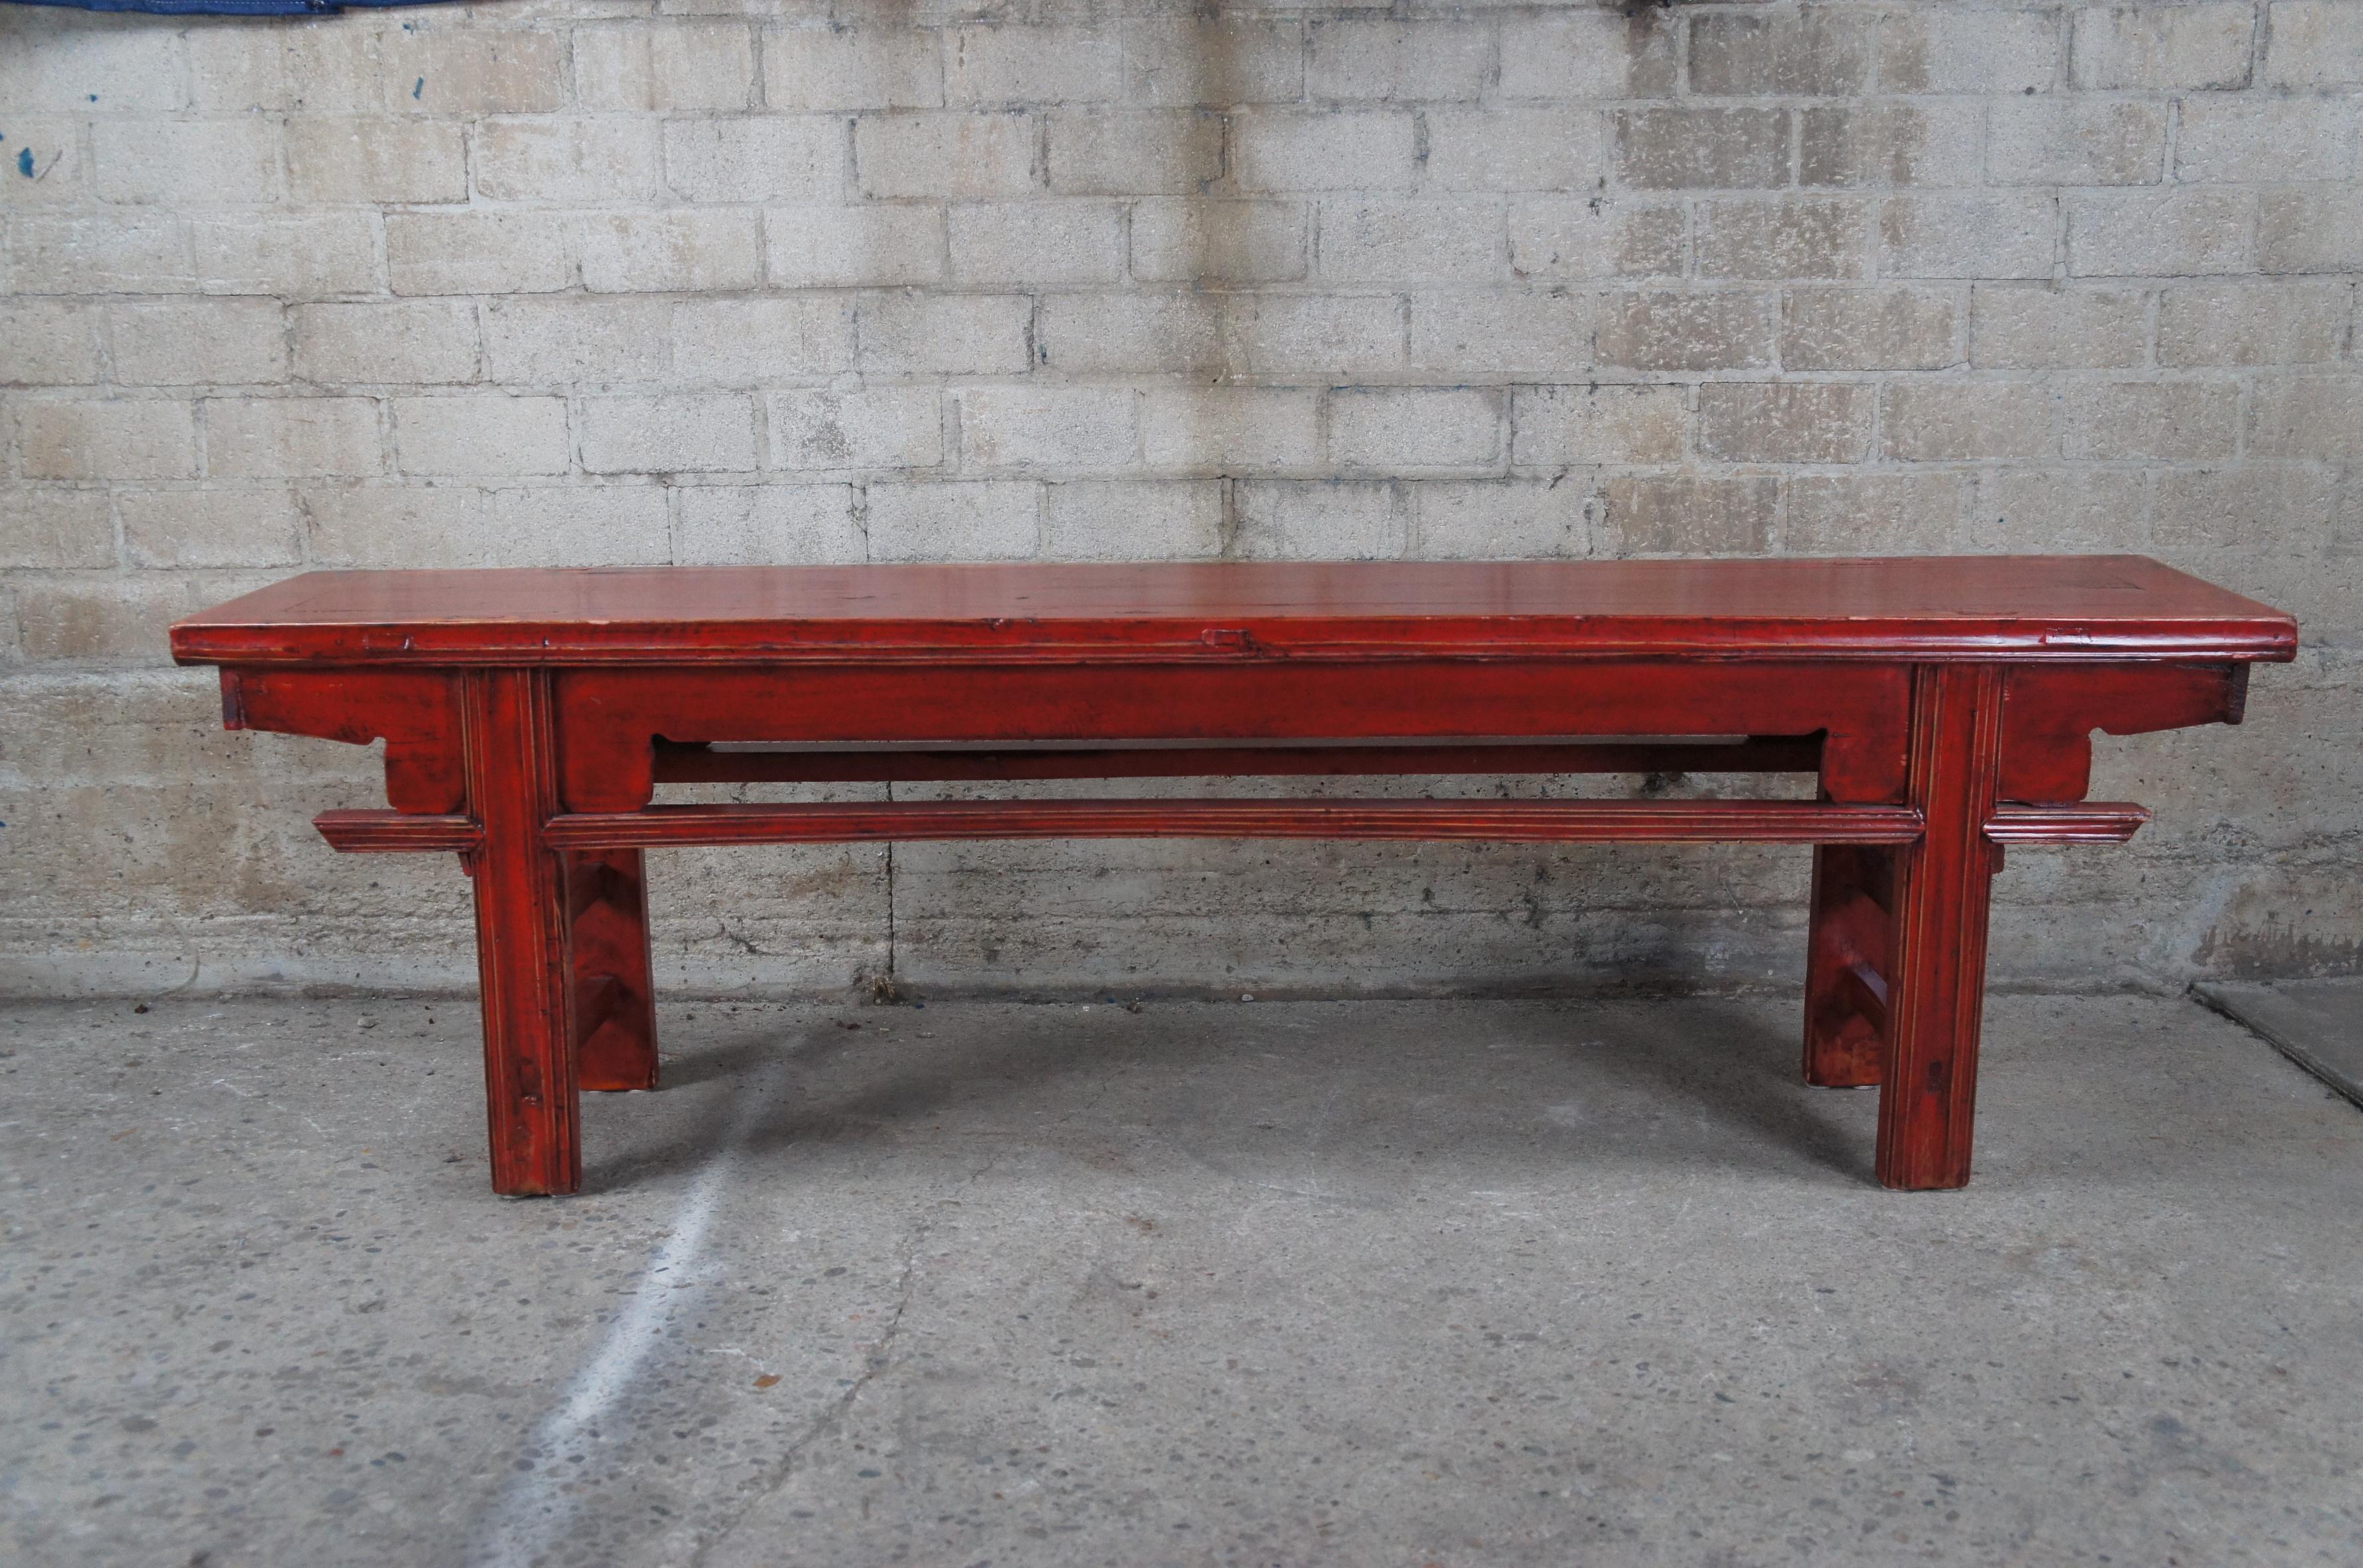 20th Century Chinese Elm Red Lacquer Chinoiserie Altar Hallway Bench Seat Pew For Sale 4